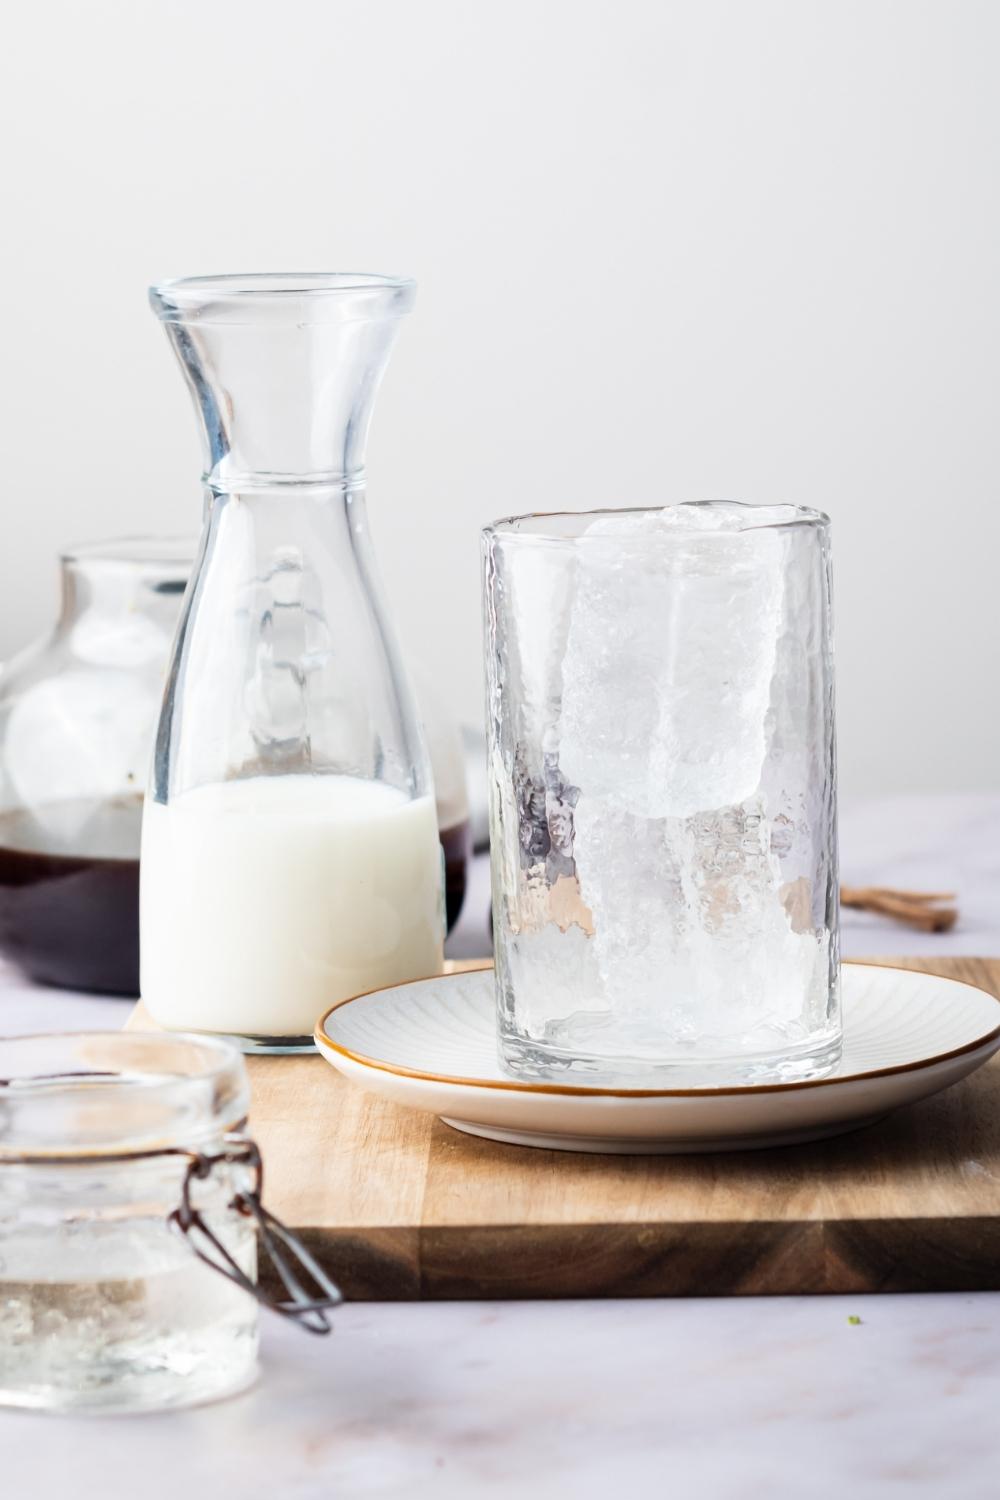 A glass with two big ice cubes, a pitcher with half and half, and coffee picture containing black coffee.